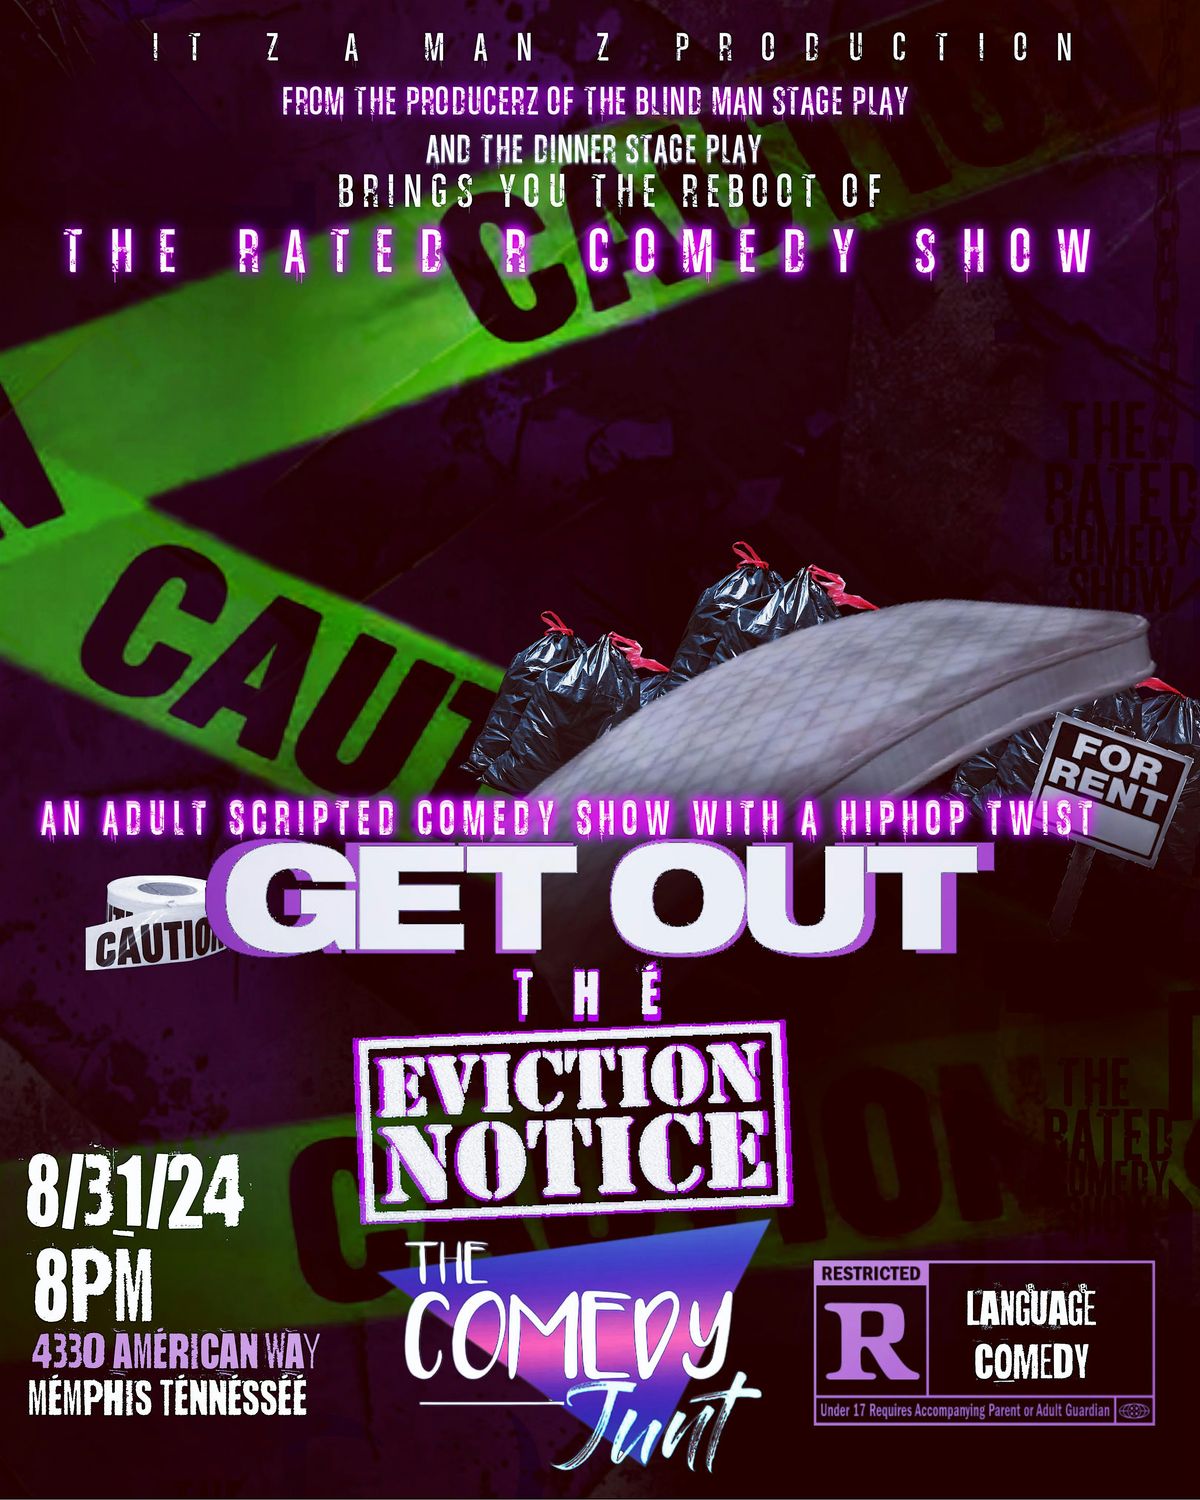 The Rated R Comedy Show